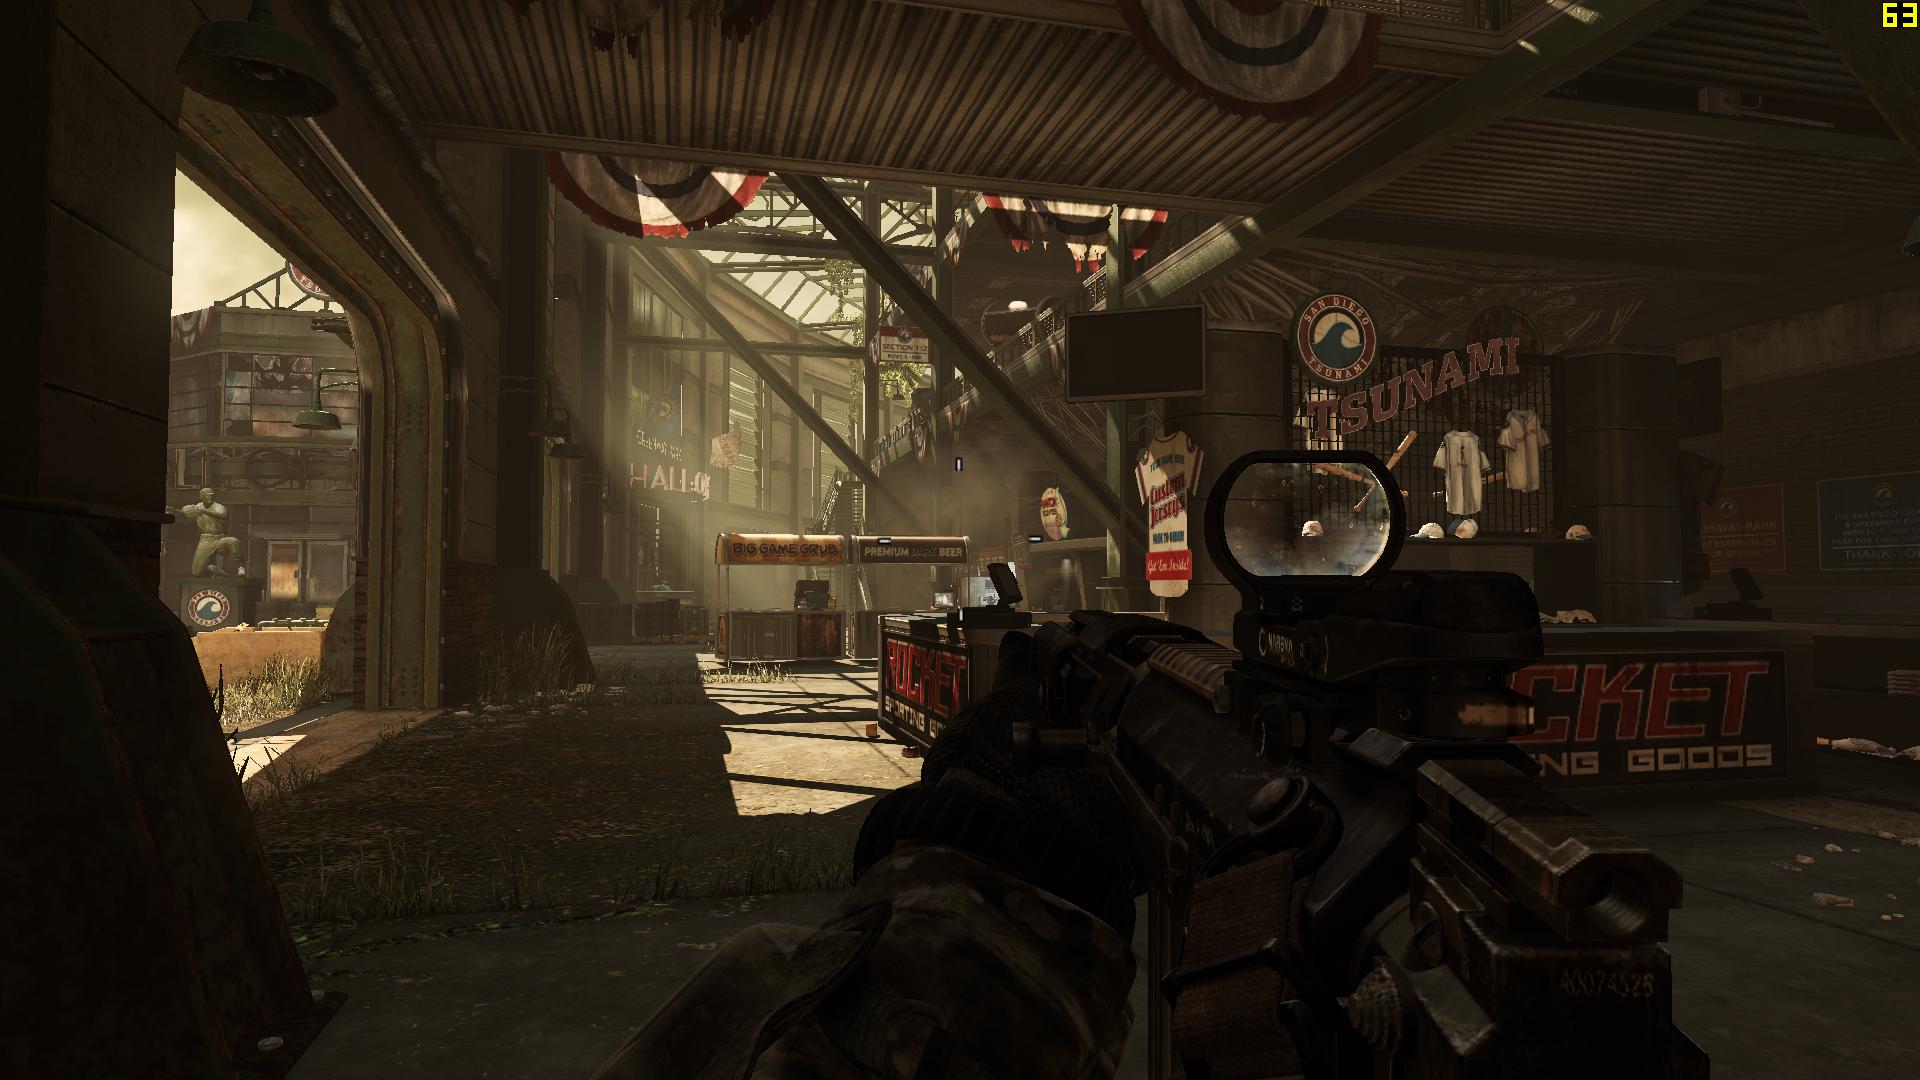 Gaming Impressions from a PC Perspective - Call of Duty Ghosts